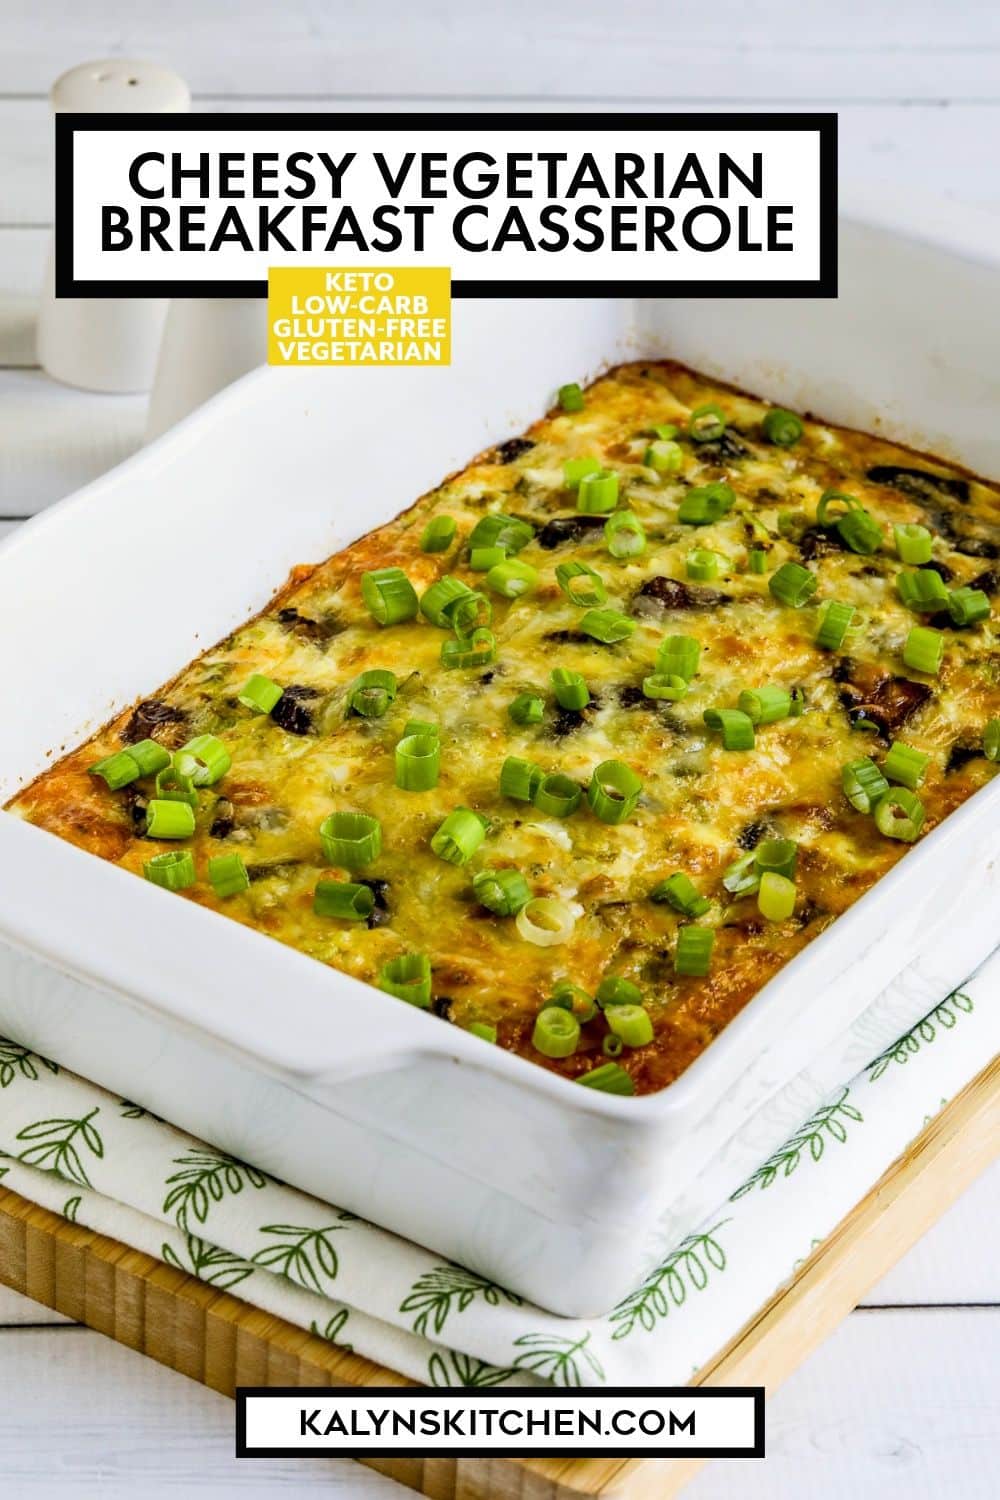 Pinterest image for Cheesy Vegetarian Breakfast Casserole shown in baking dish on napkin and cutting board.